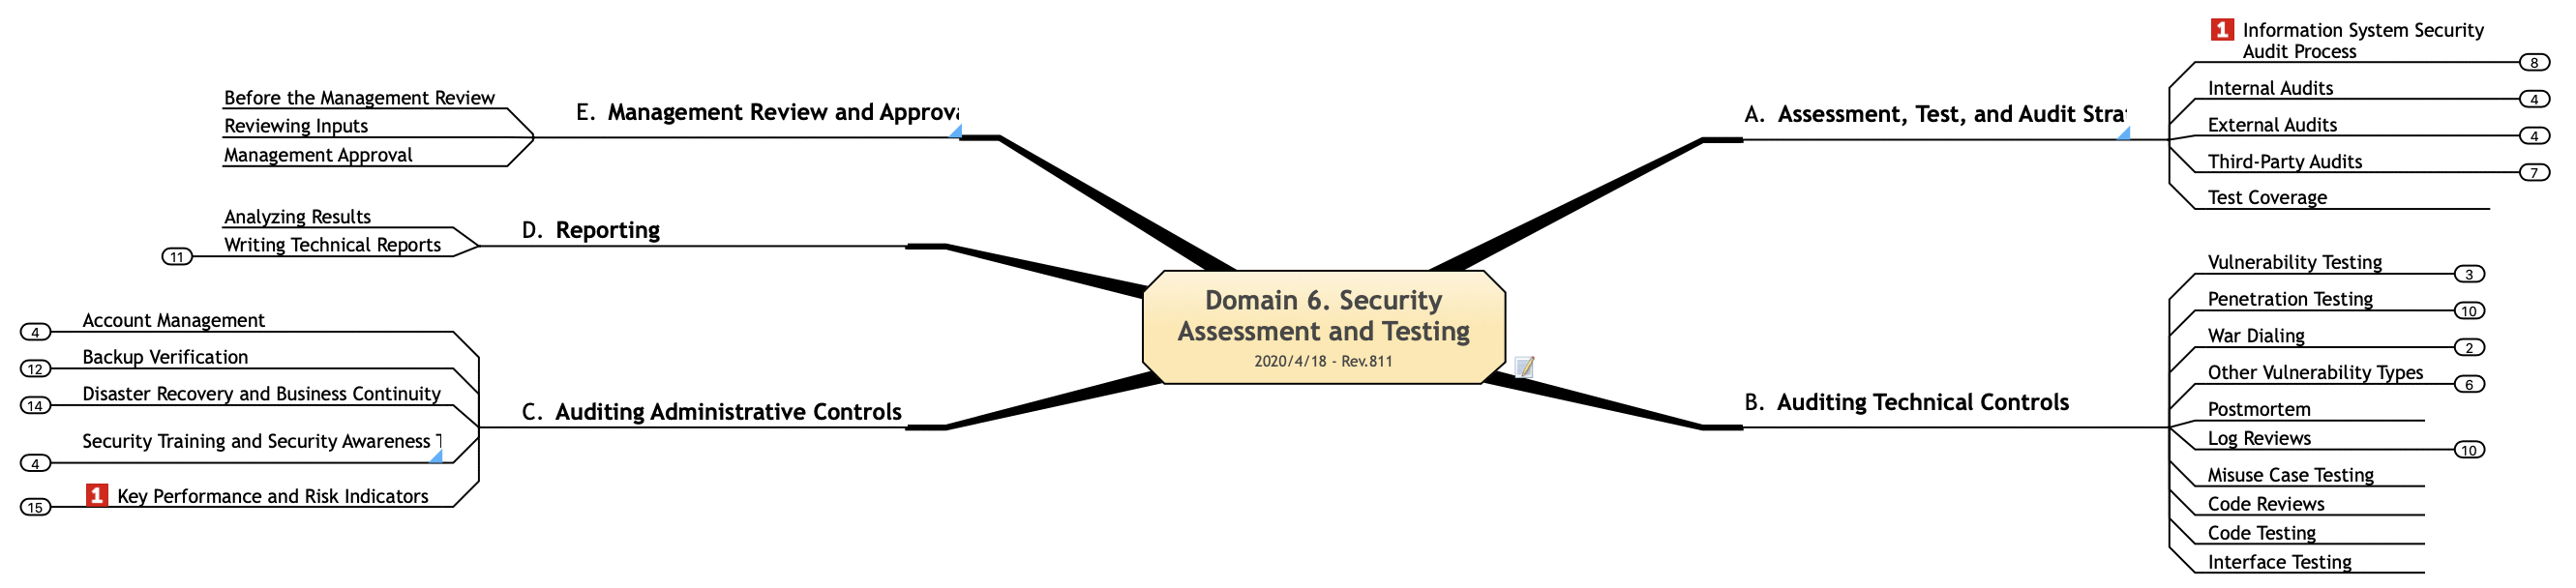 domain06. Security Assessment and Testing.gif